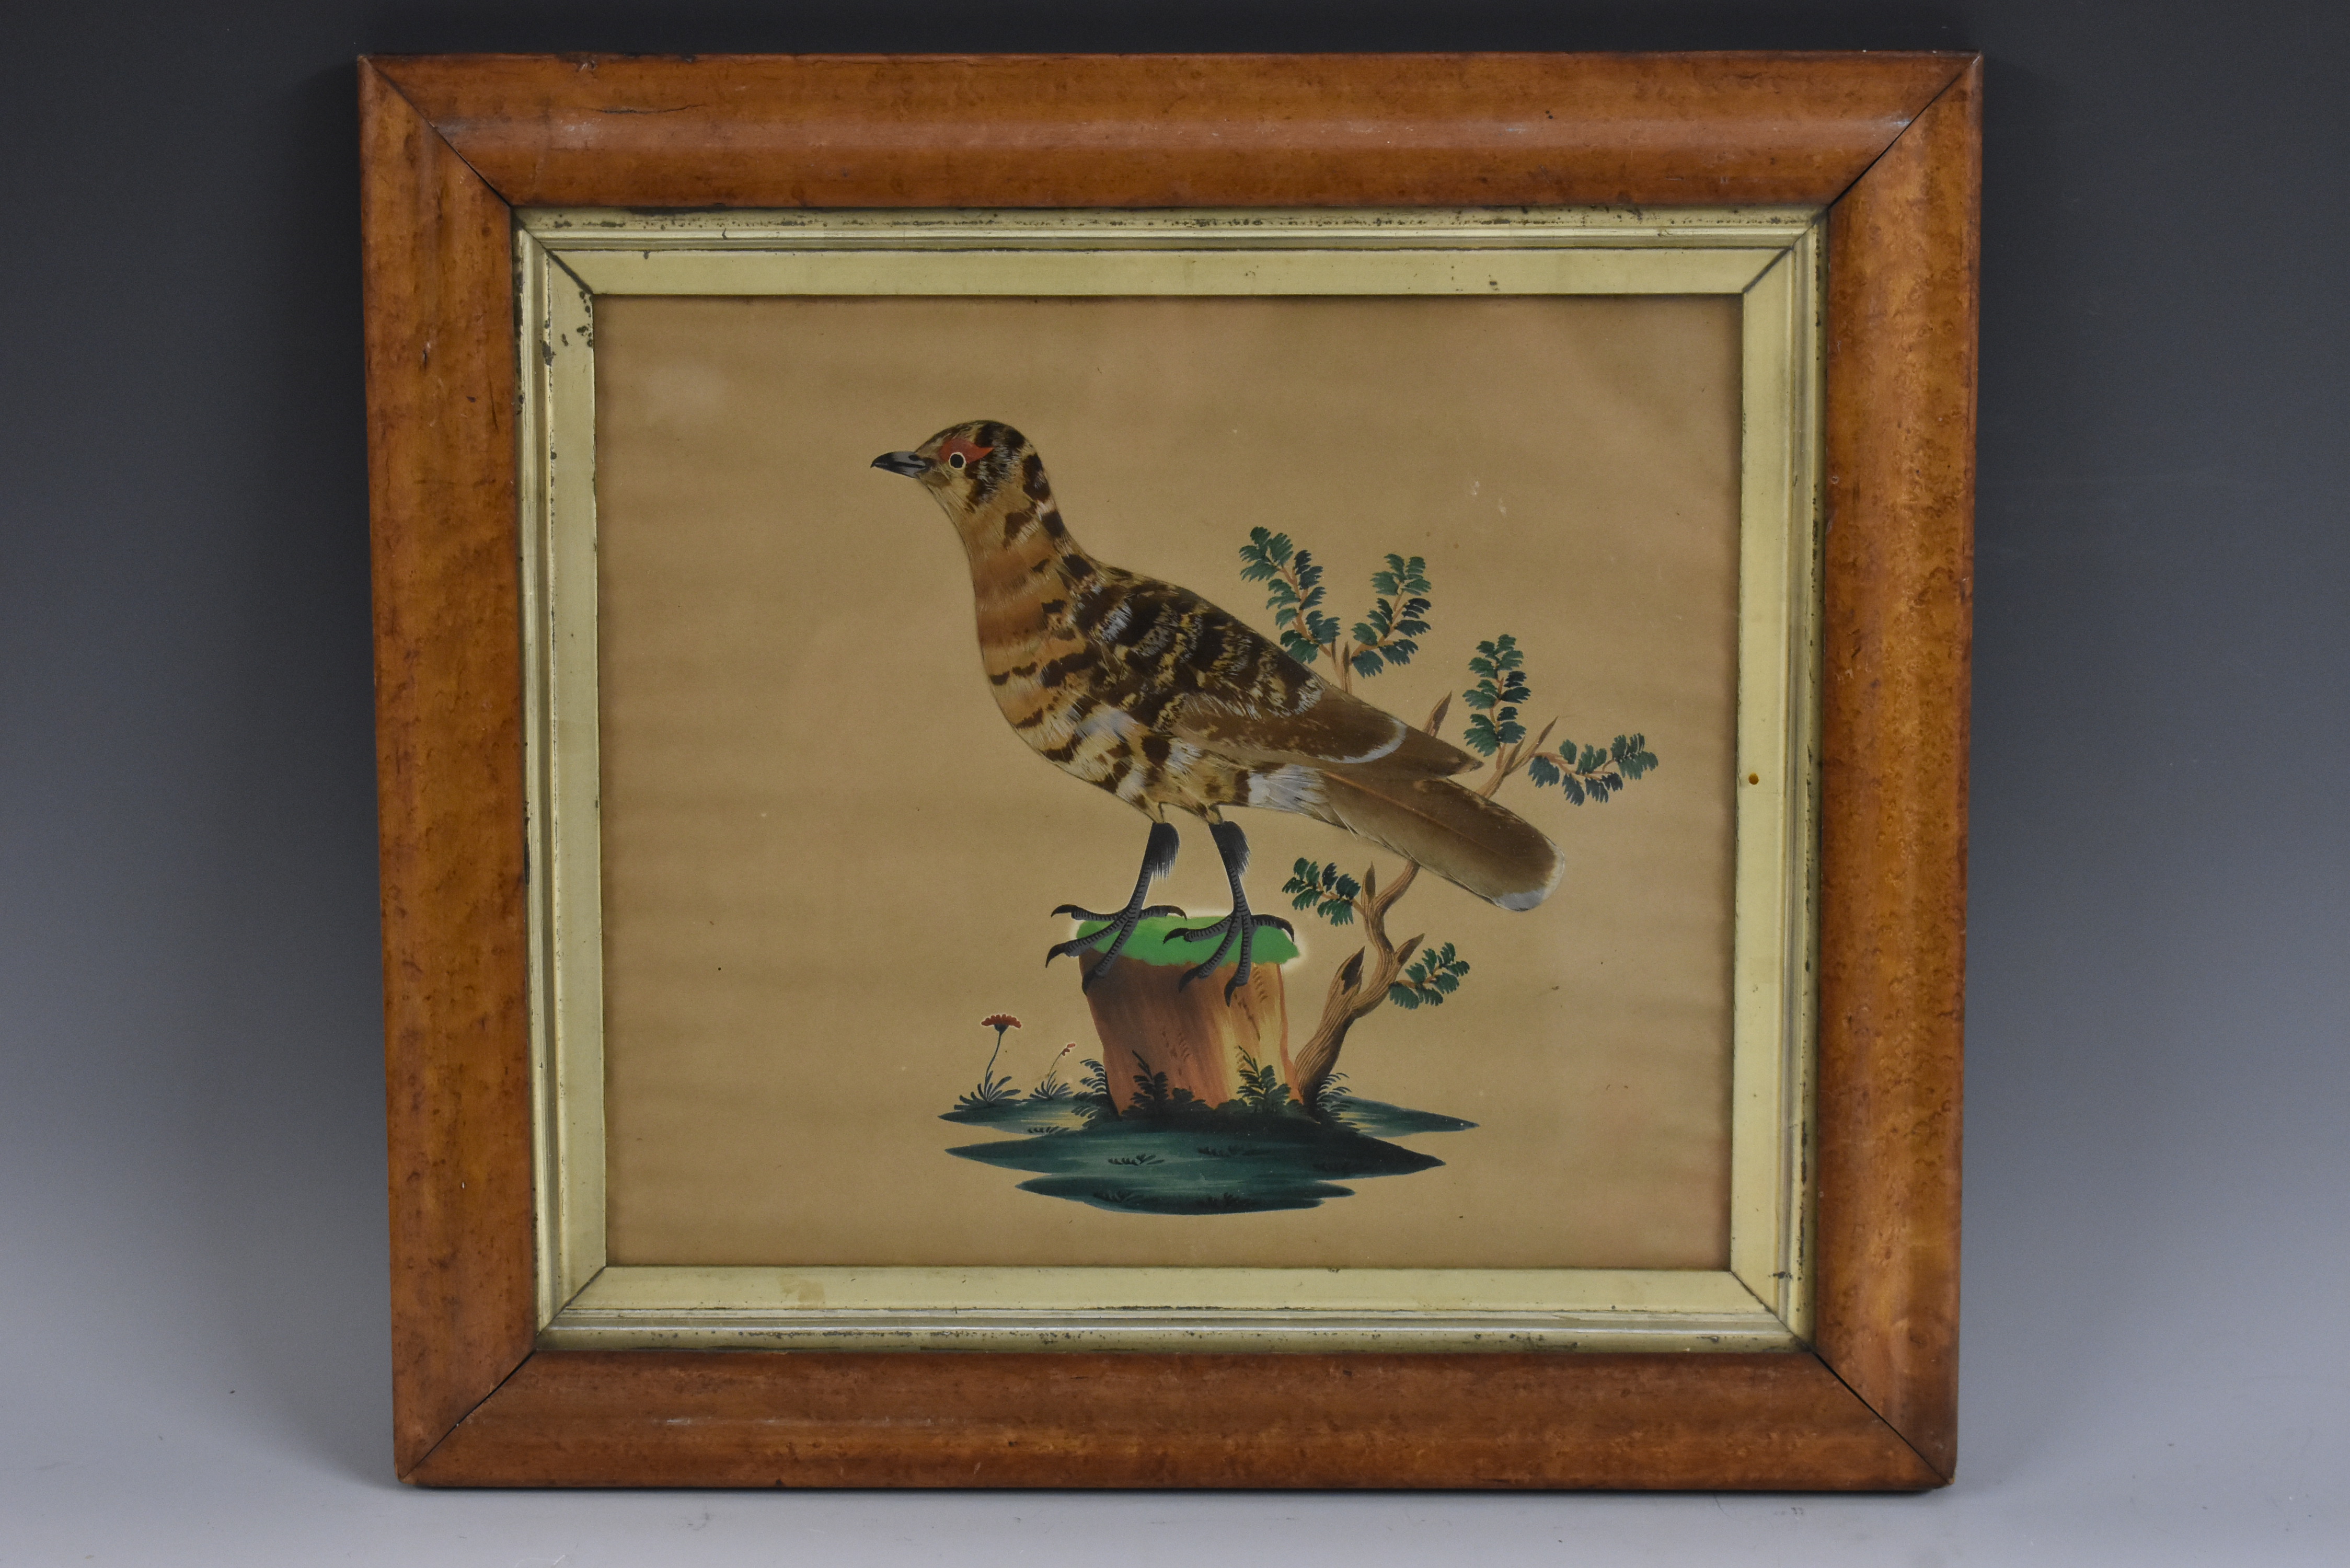 A 19th century feather picture, depicting a grouse perced on a tree stump, watercolour ground, 23.